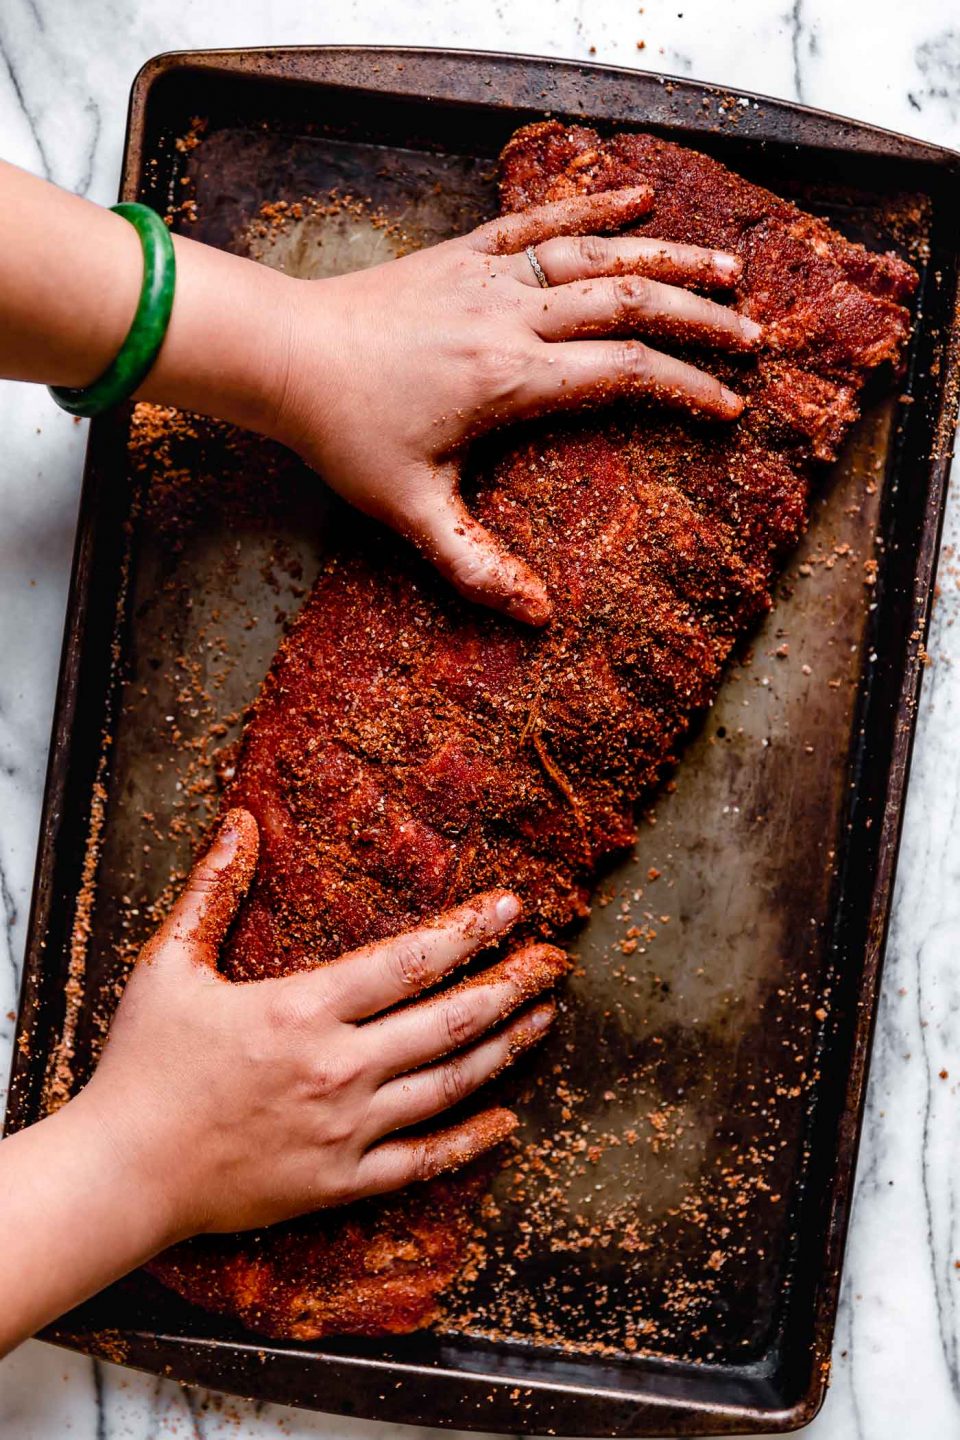 A rack of ribs, seasoned generously with dry rub for baby back ribs, on a patina baking sheet on a white marble surface. Woman's hands reaching into the frame to rub the dry rub into the ribs.